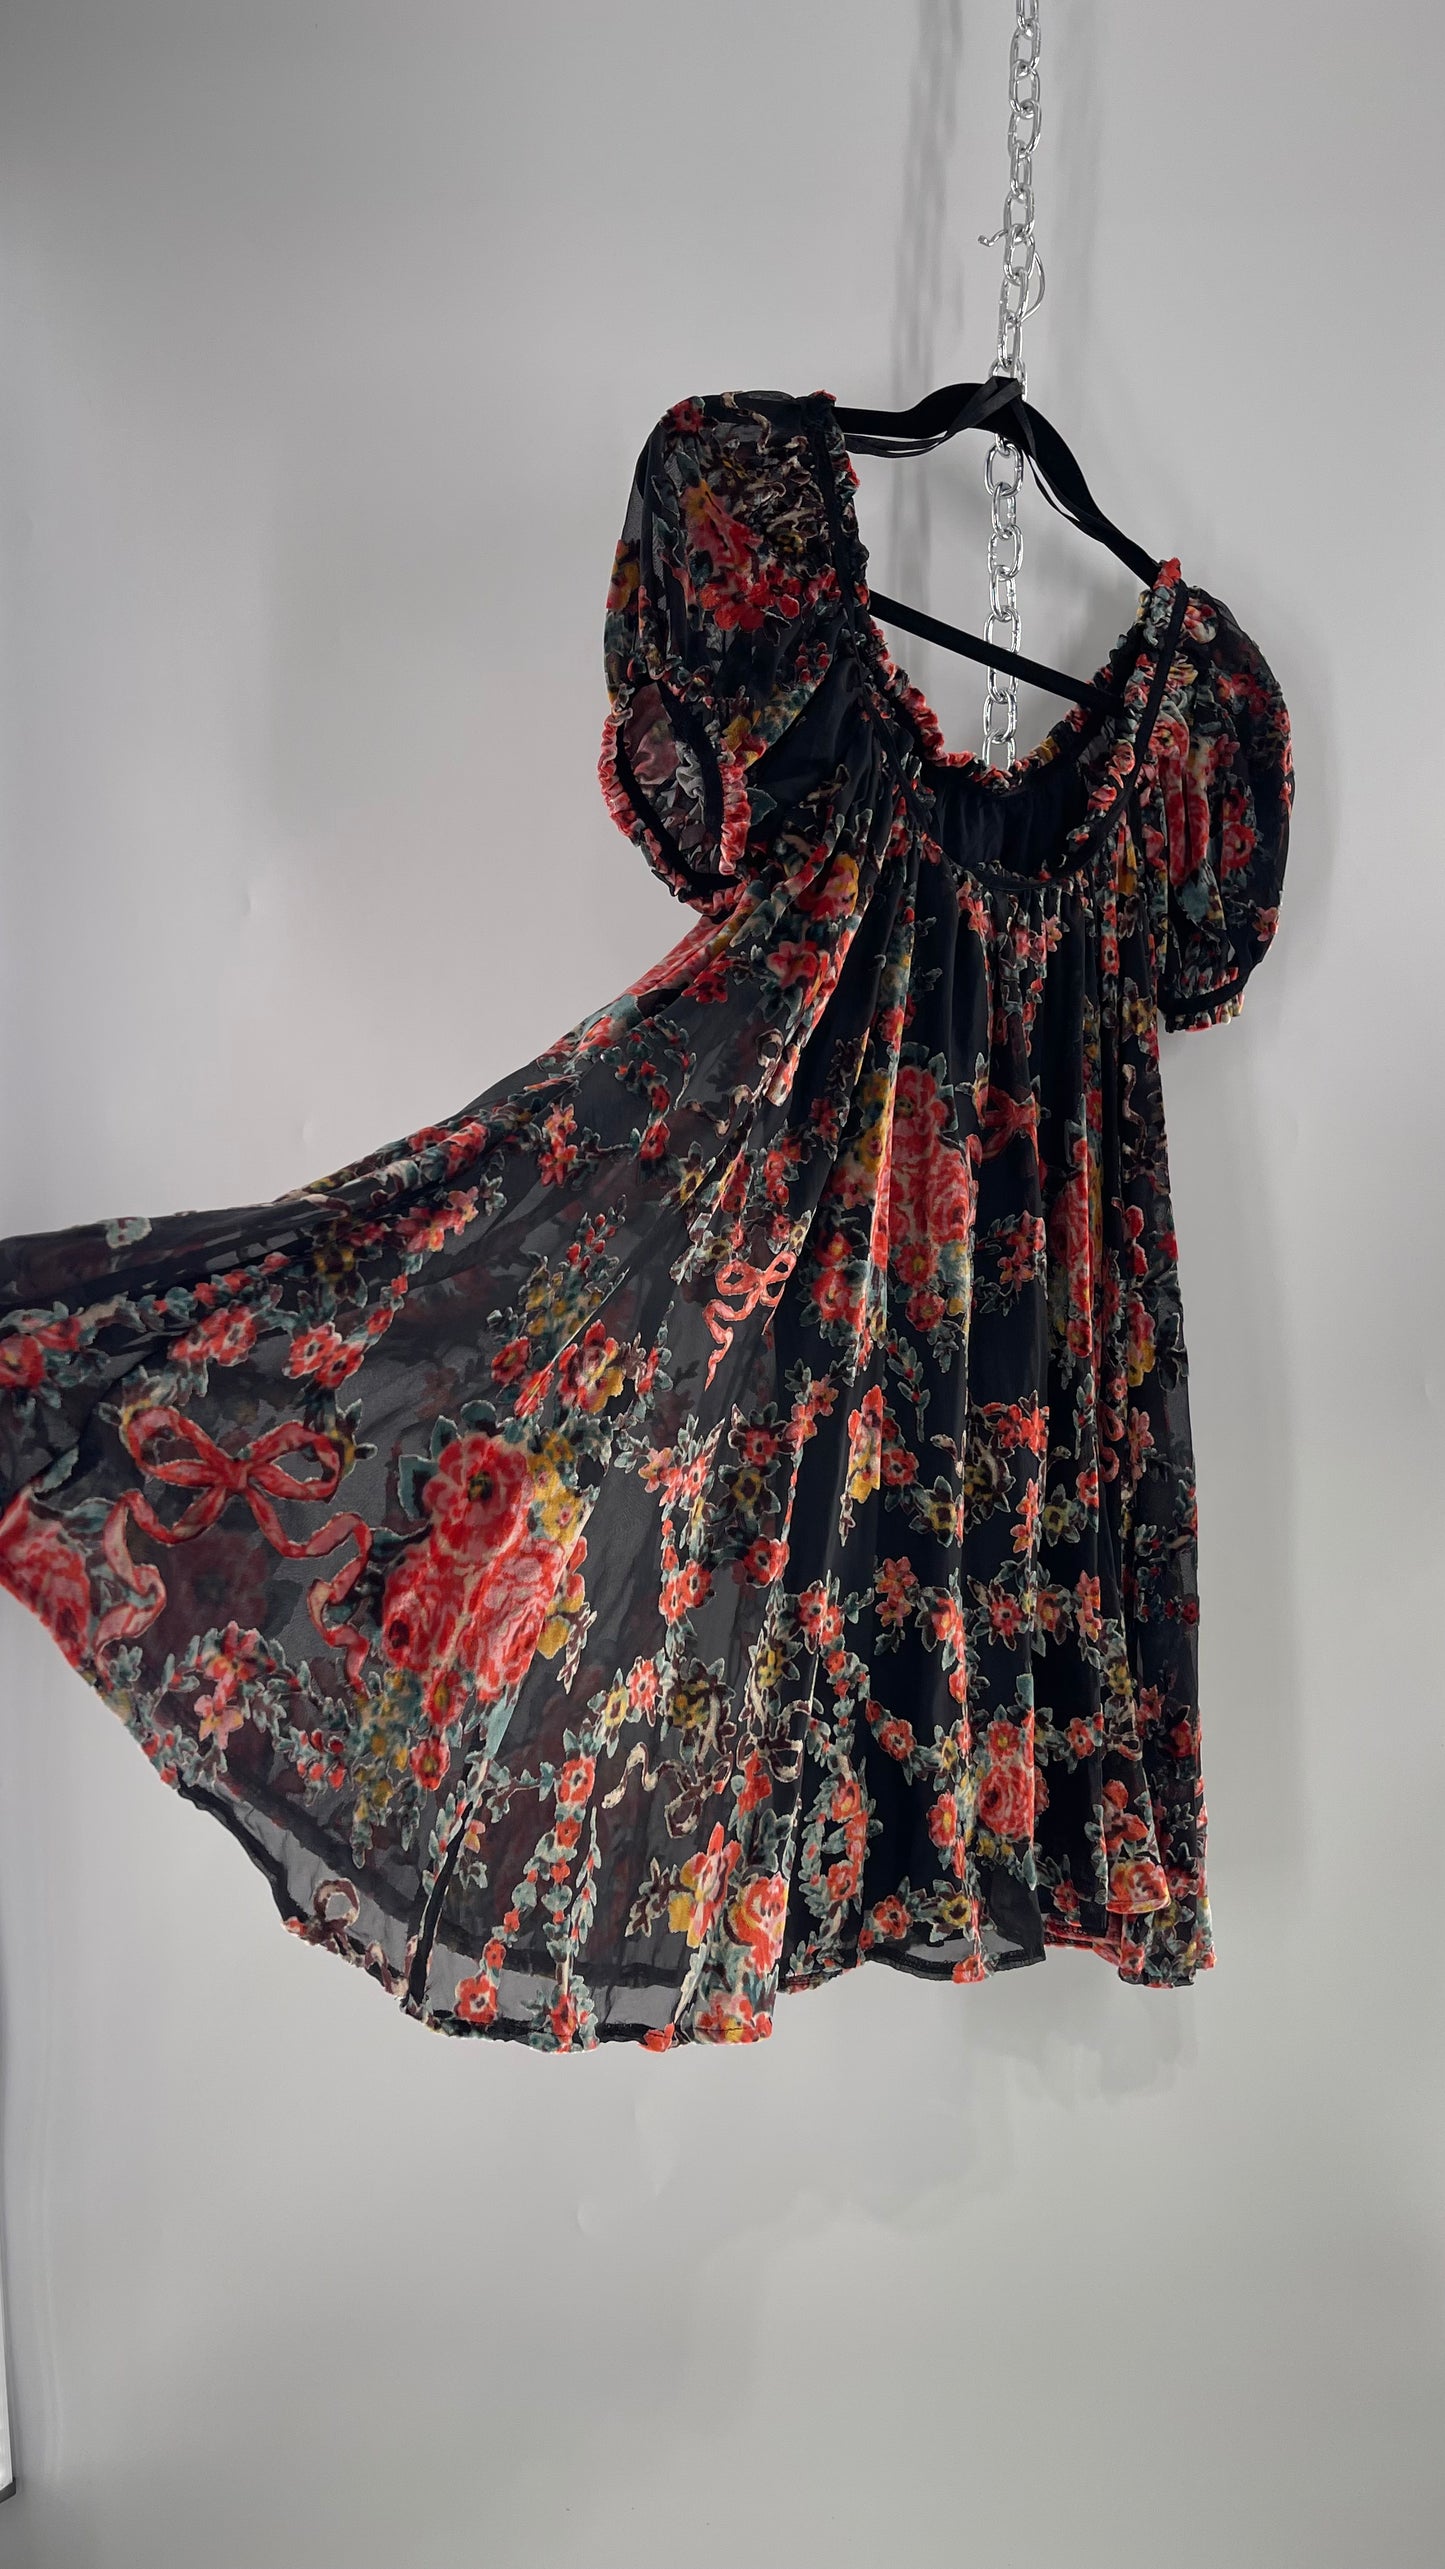 Free People Beautiful Blooms Velvet Florals Babydoll Dress (Small)